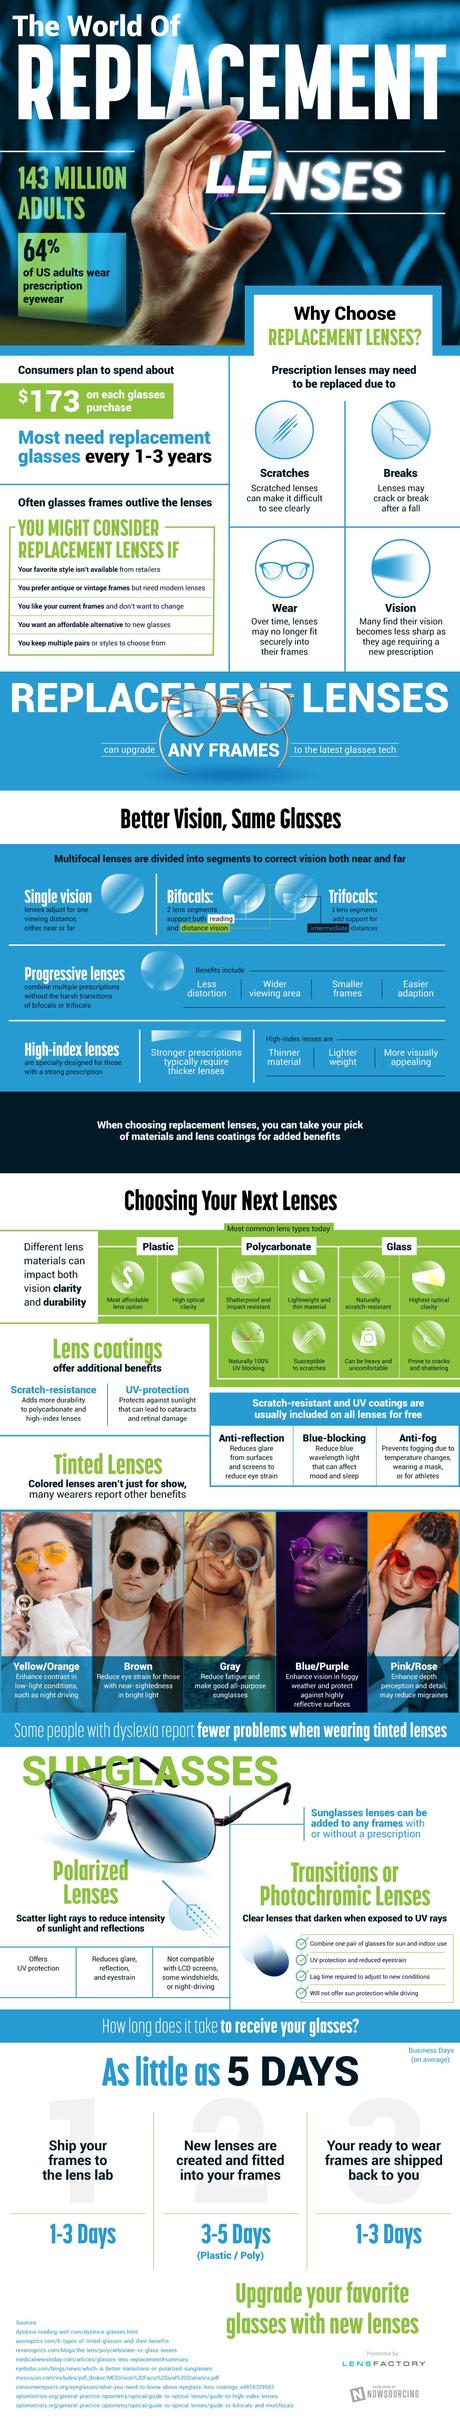 The World of Replacement Lenses